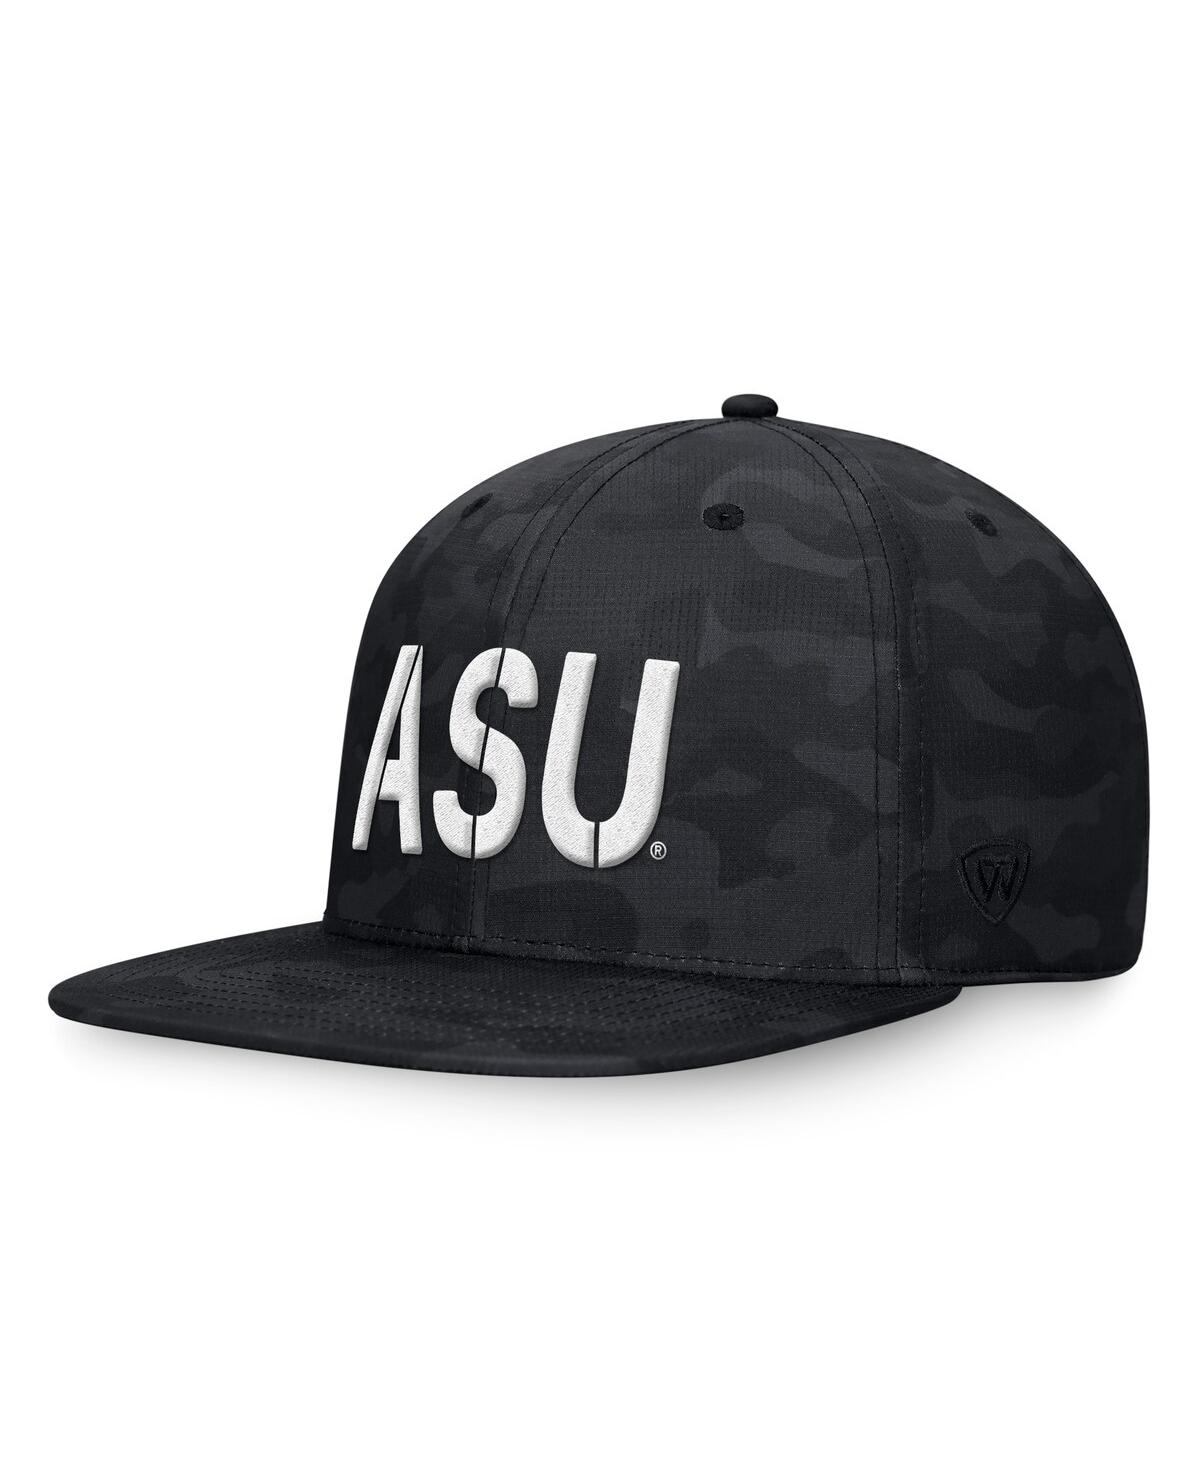 Shop Top Of The World Men's  Black Arizona State Sun Devils Oht Military-inspired Appreciation Troop Snapb